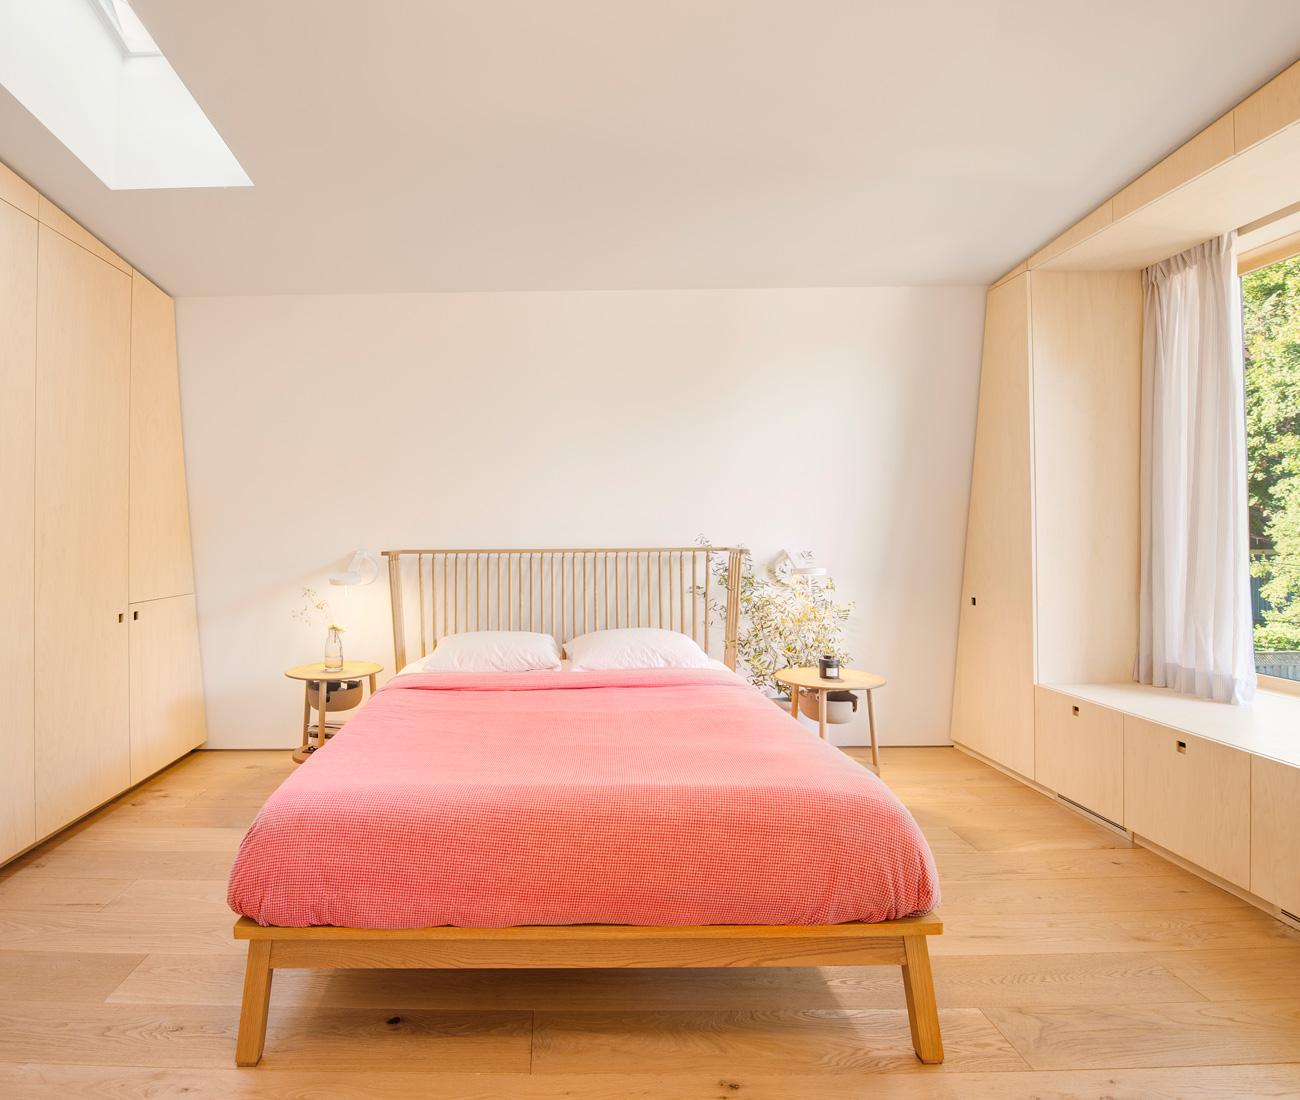 In the master bedroom a metre-wide windowseat overlooks the garden. Side tables and Ilse Crawford bedframe from Mjölk.